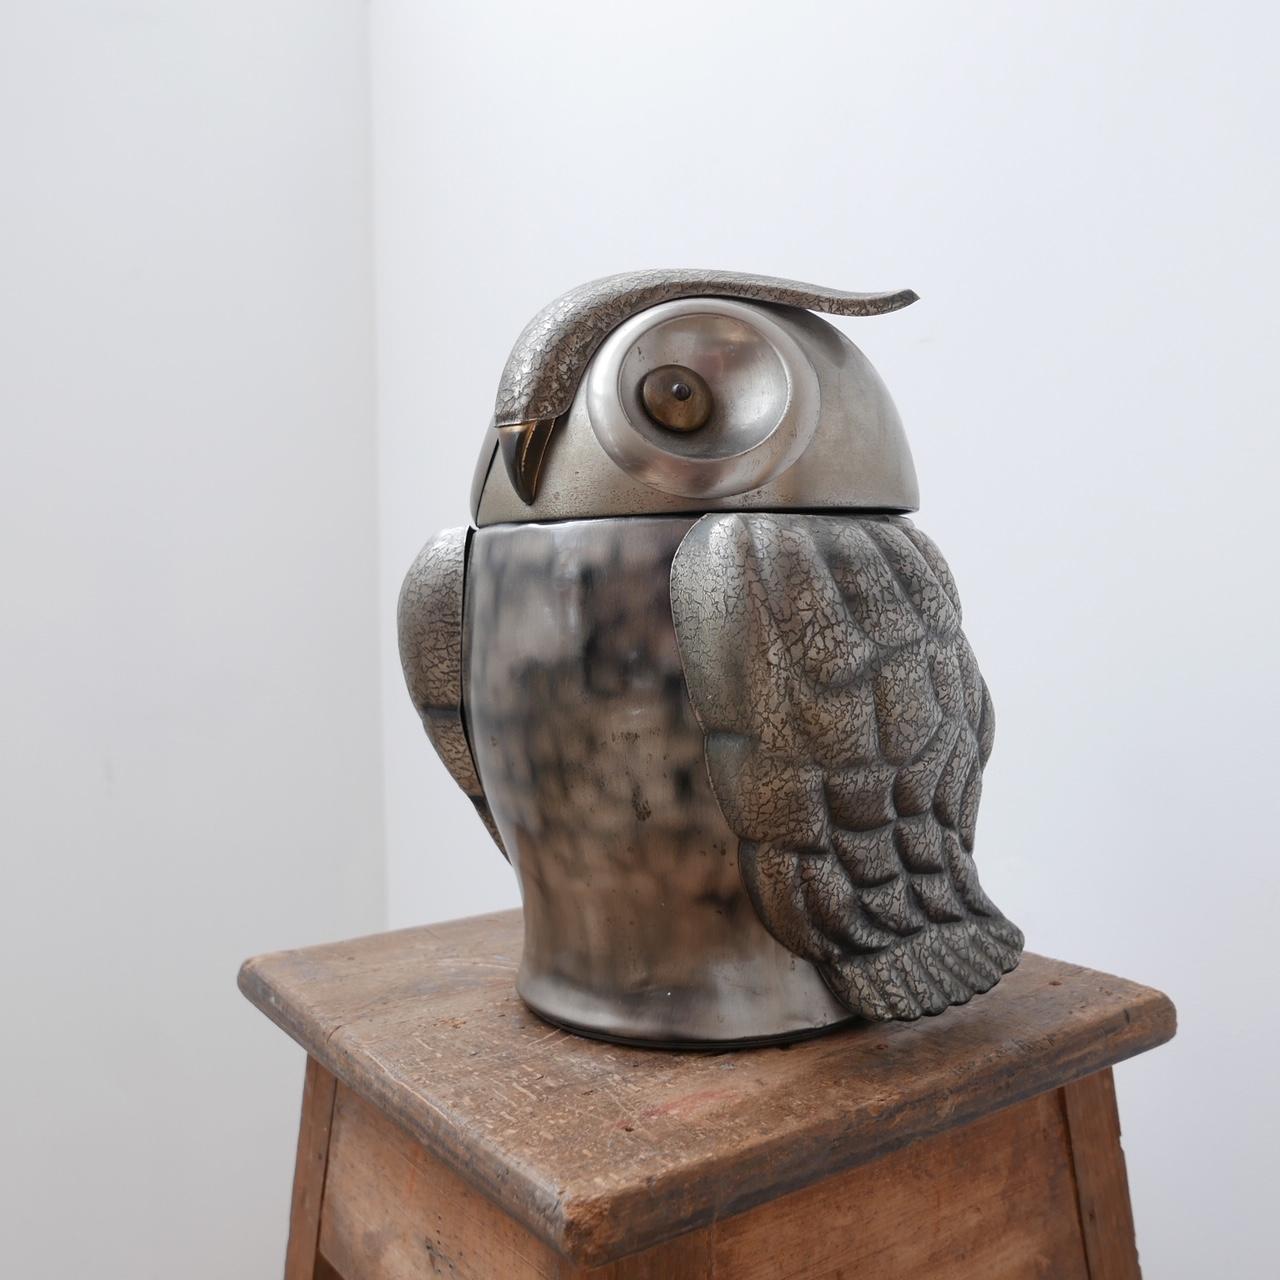 A French ice bucket in the form of an owl. 

Brutalist style. 

France, c1970s. 

The head opens up. Some internal wear commensurate with age but generally good condition. 

Dimensions: 20 D x 25 W x 33 H in cm. 

Delivery: POA.

 